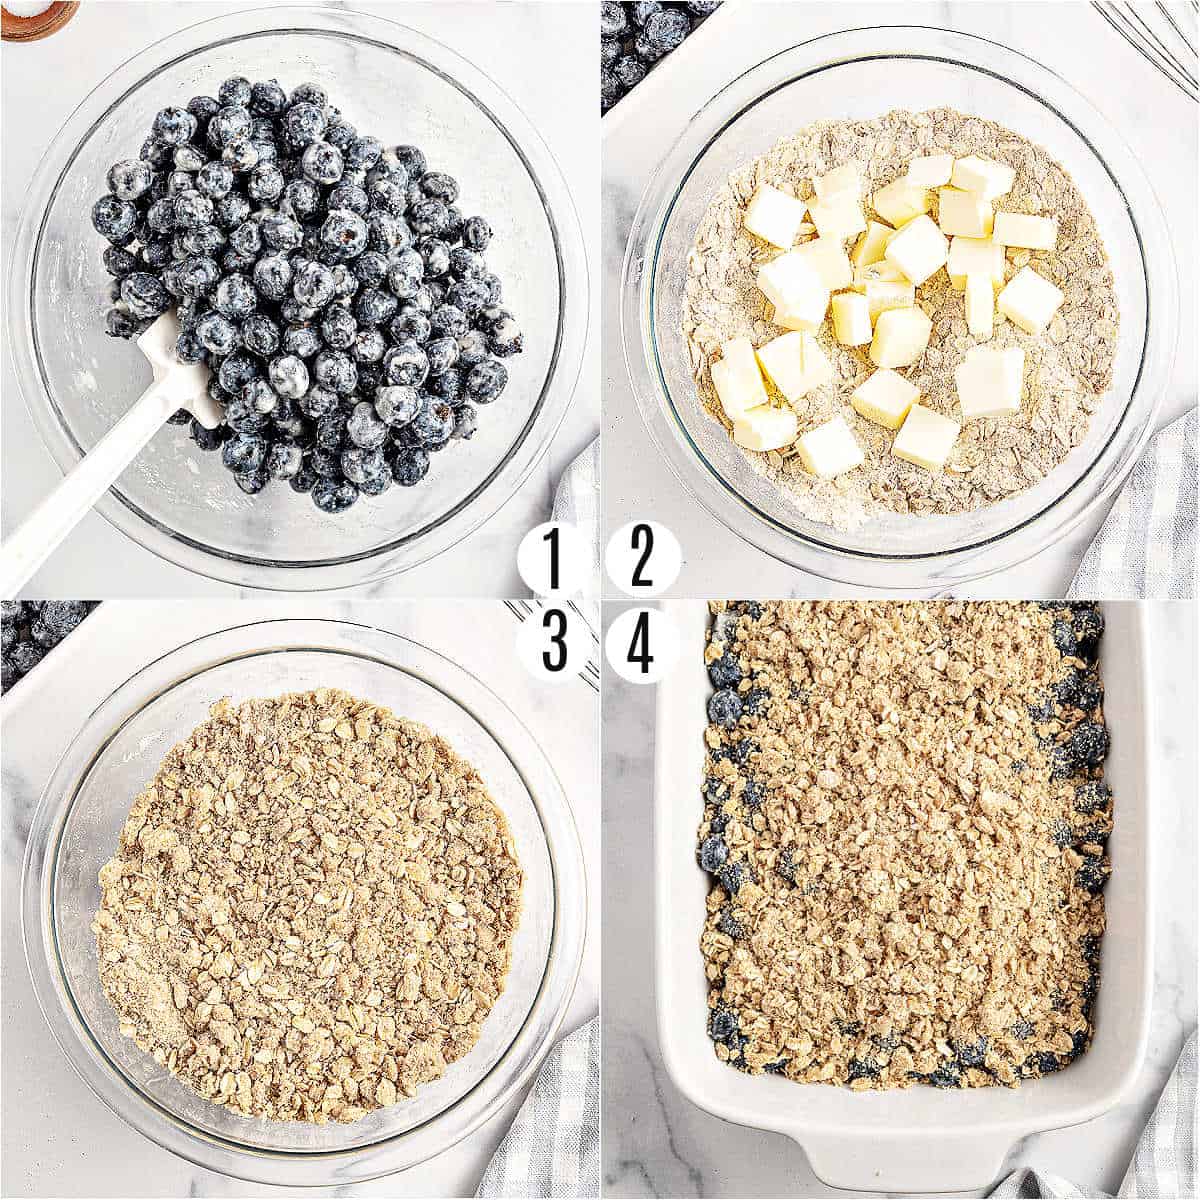 Step by step photos showing how to make blueberry crisp.